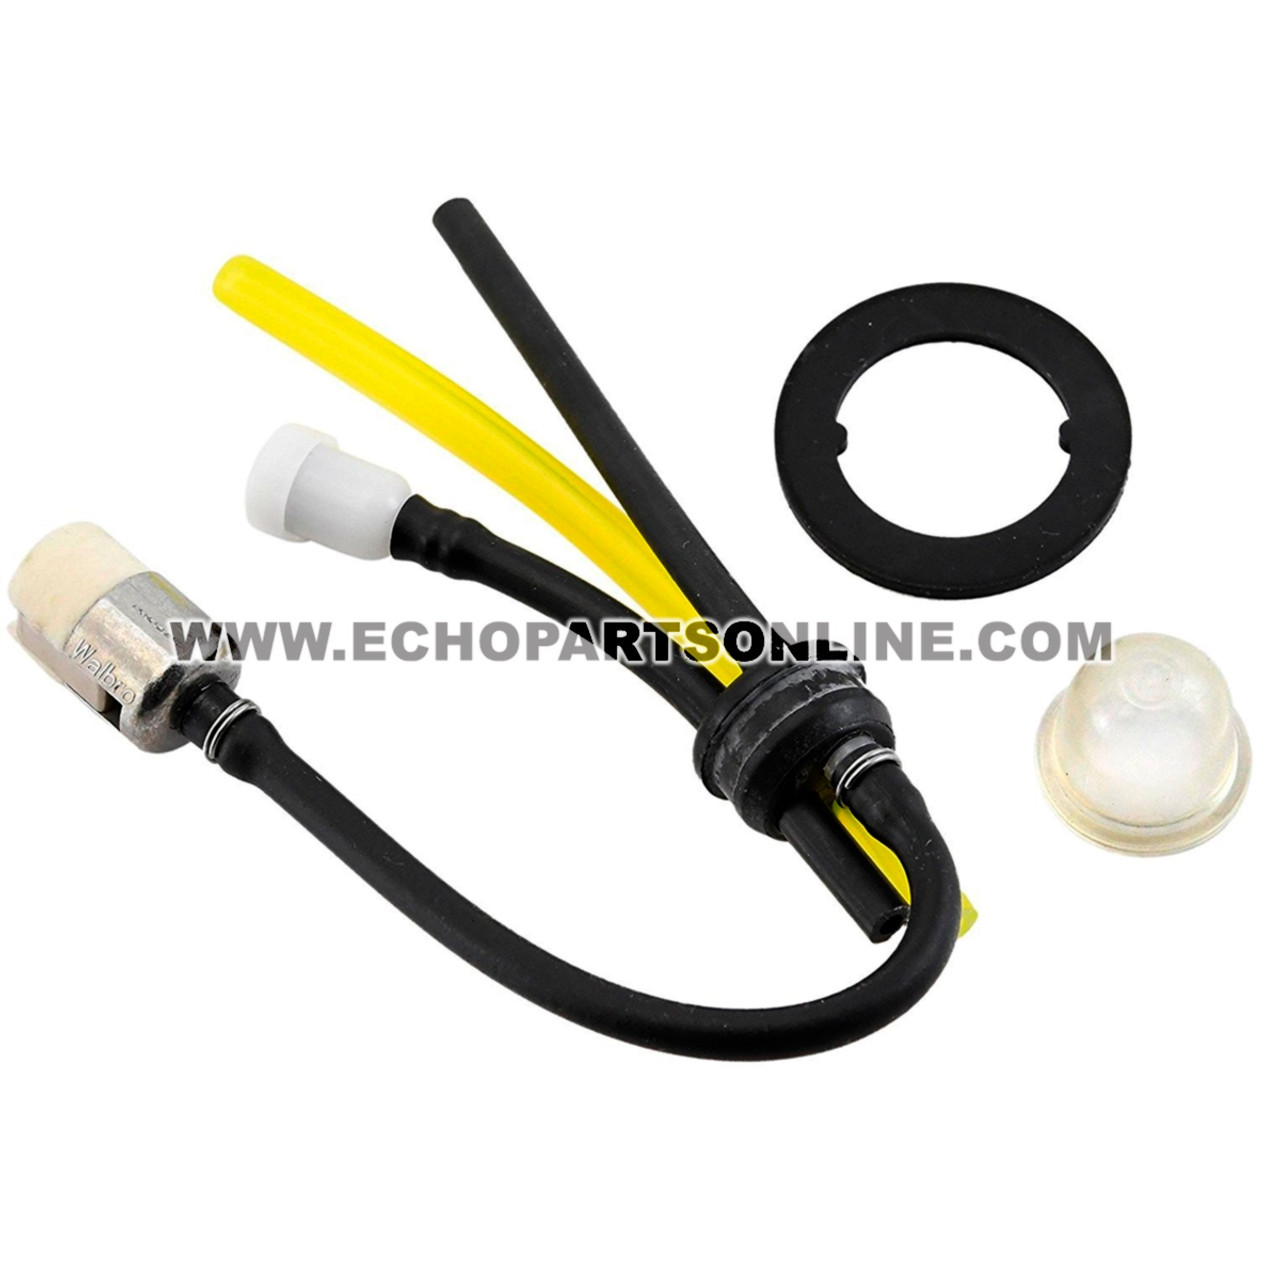 Filter Vent Fuel Line Trimmer Weed Eater Part Fit Echo 90097 US Details about   Fuel System Kit 